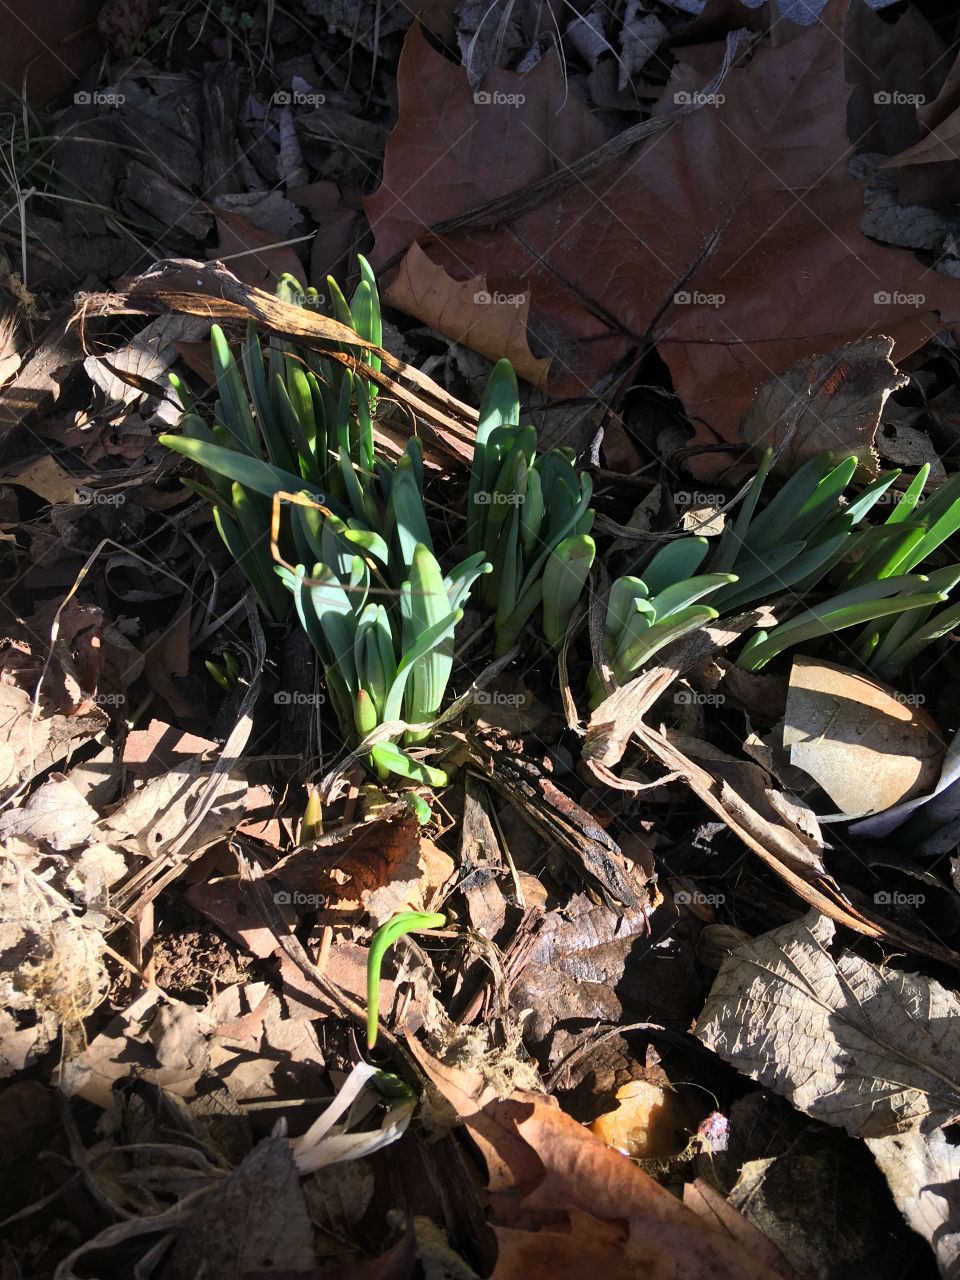 Wow! Does this mean that spring is on the way soon? My daffodils have pushed through.